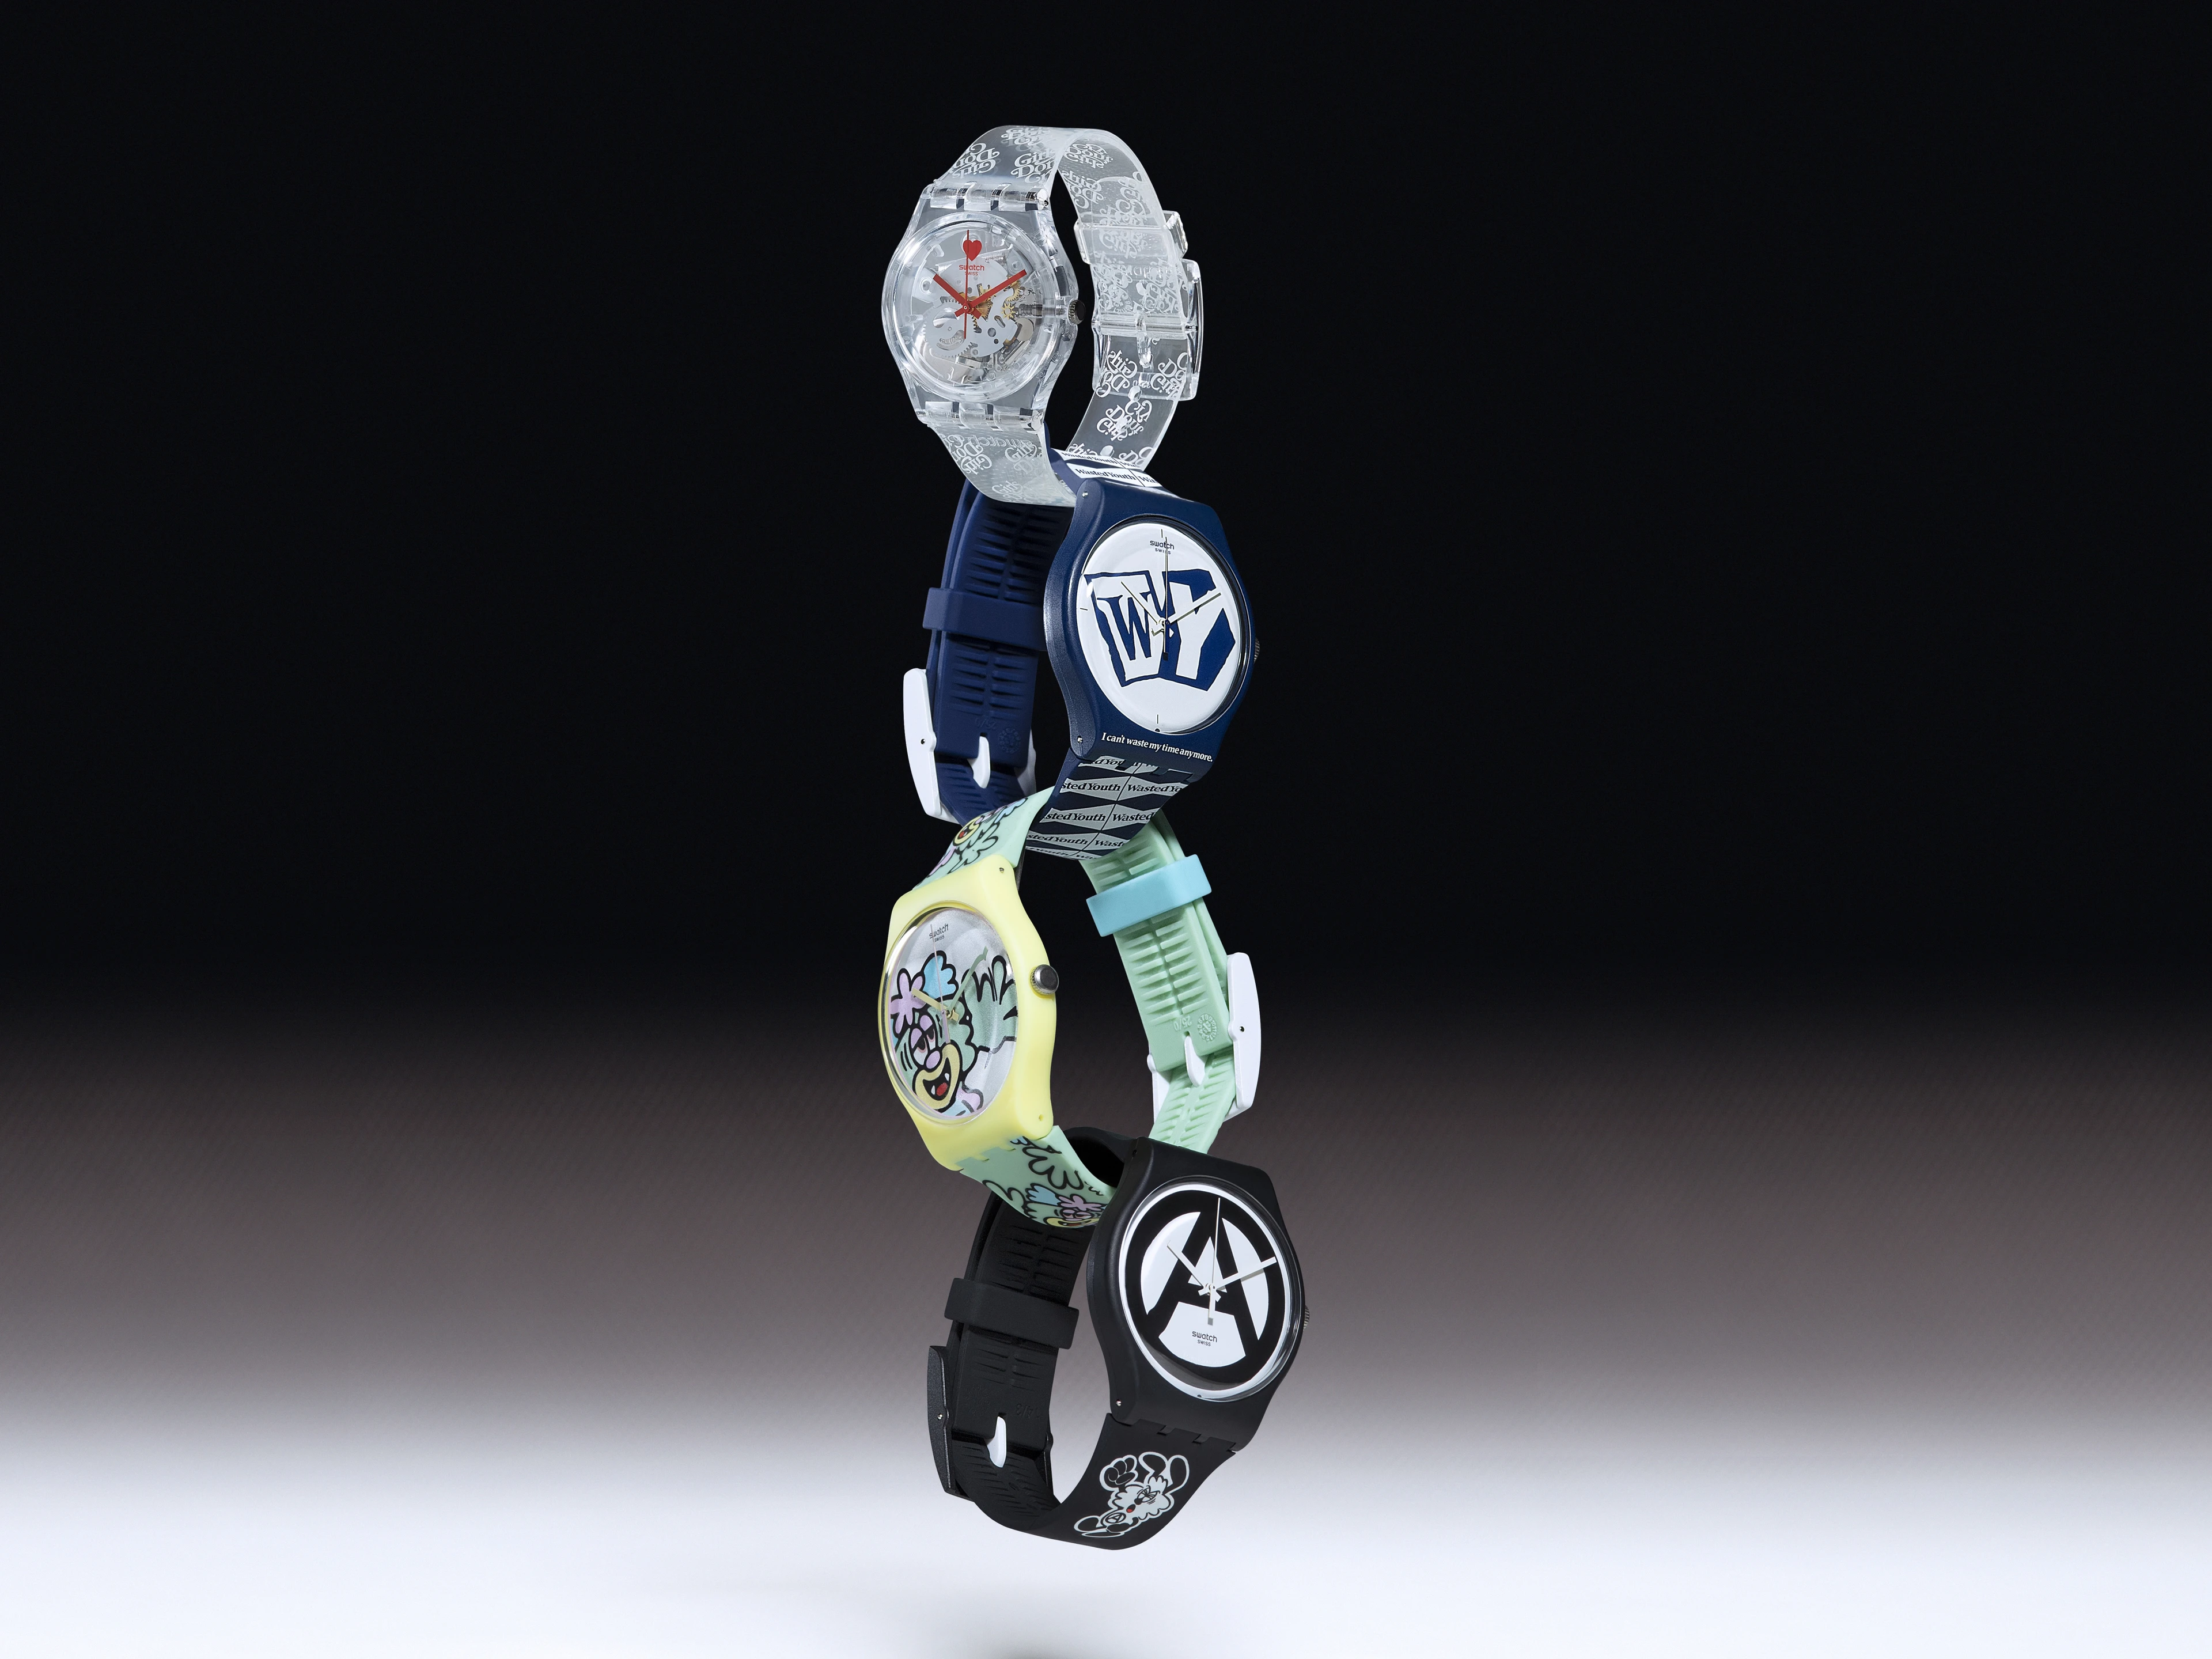 Positive messaging with the Swatch x Verdy Collection - Swatch Ltd